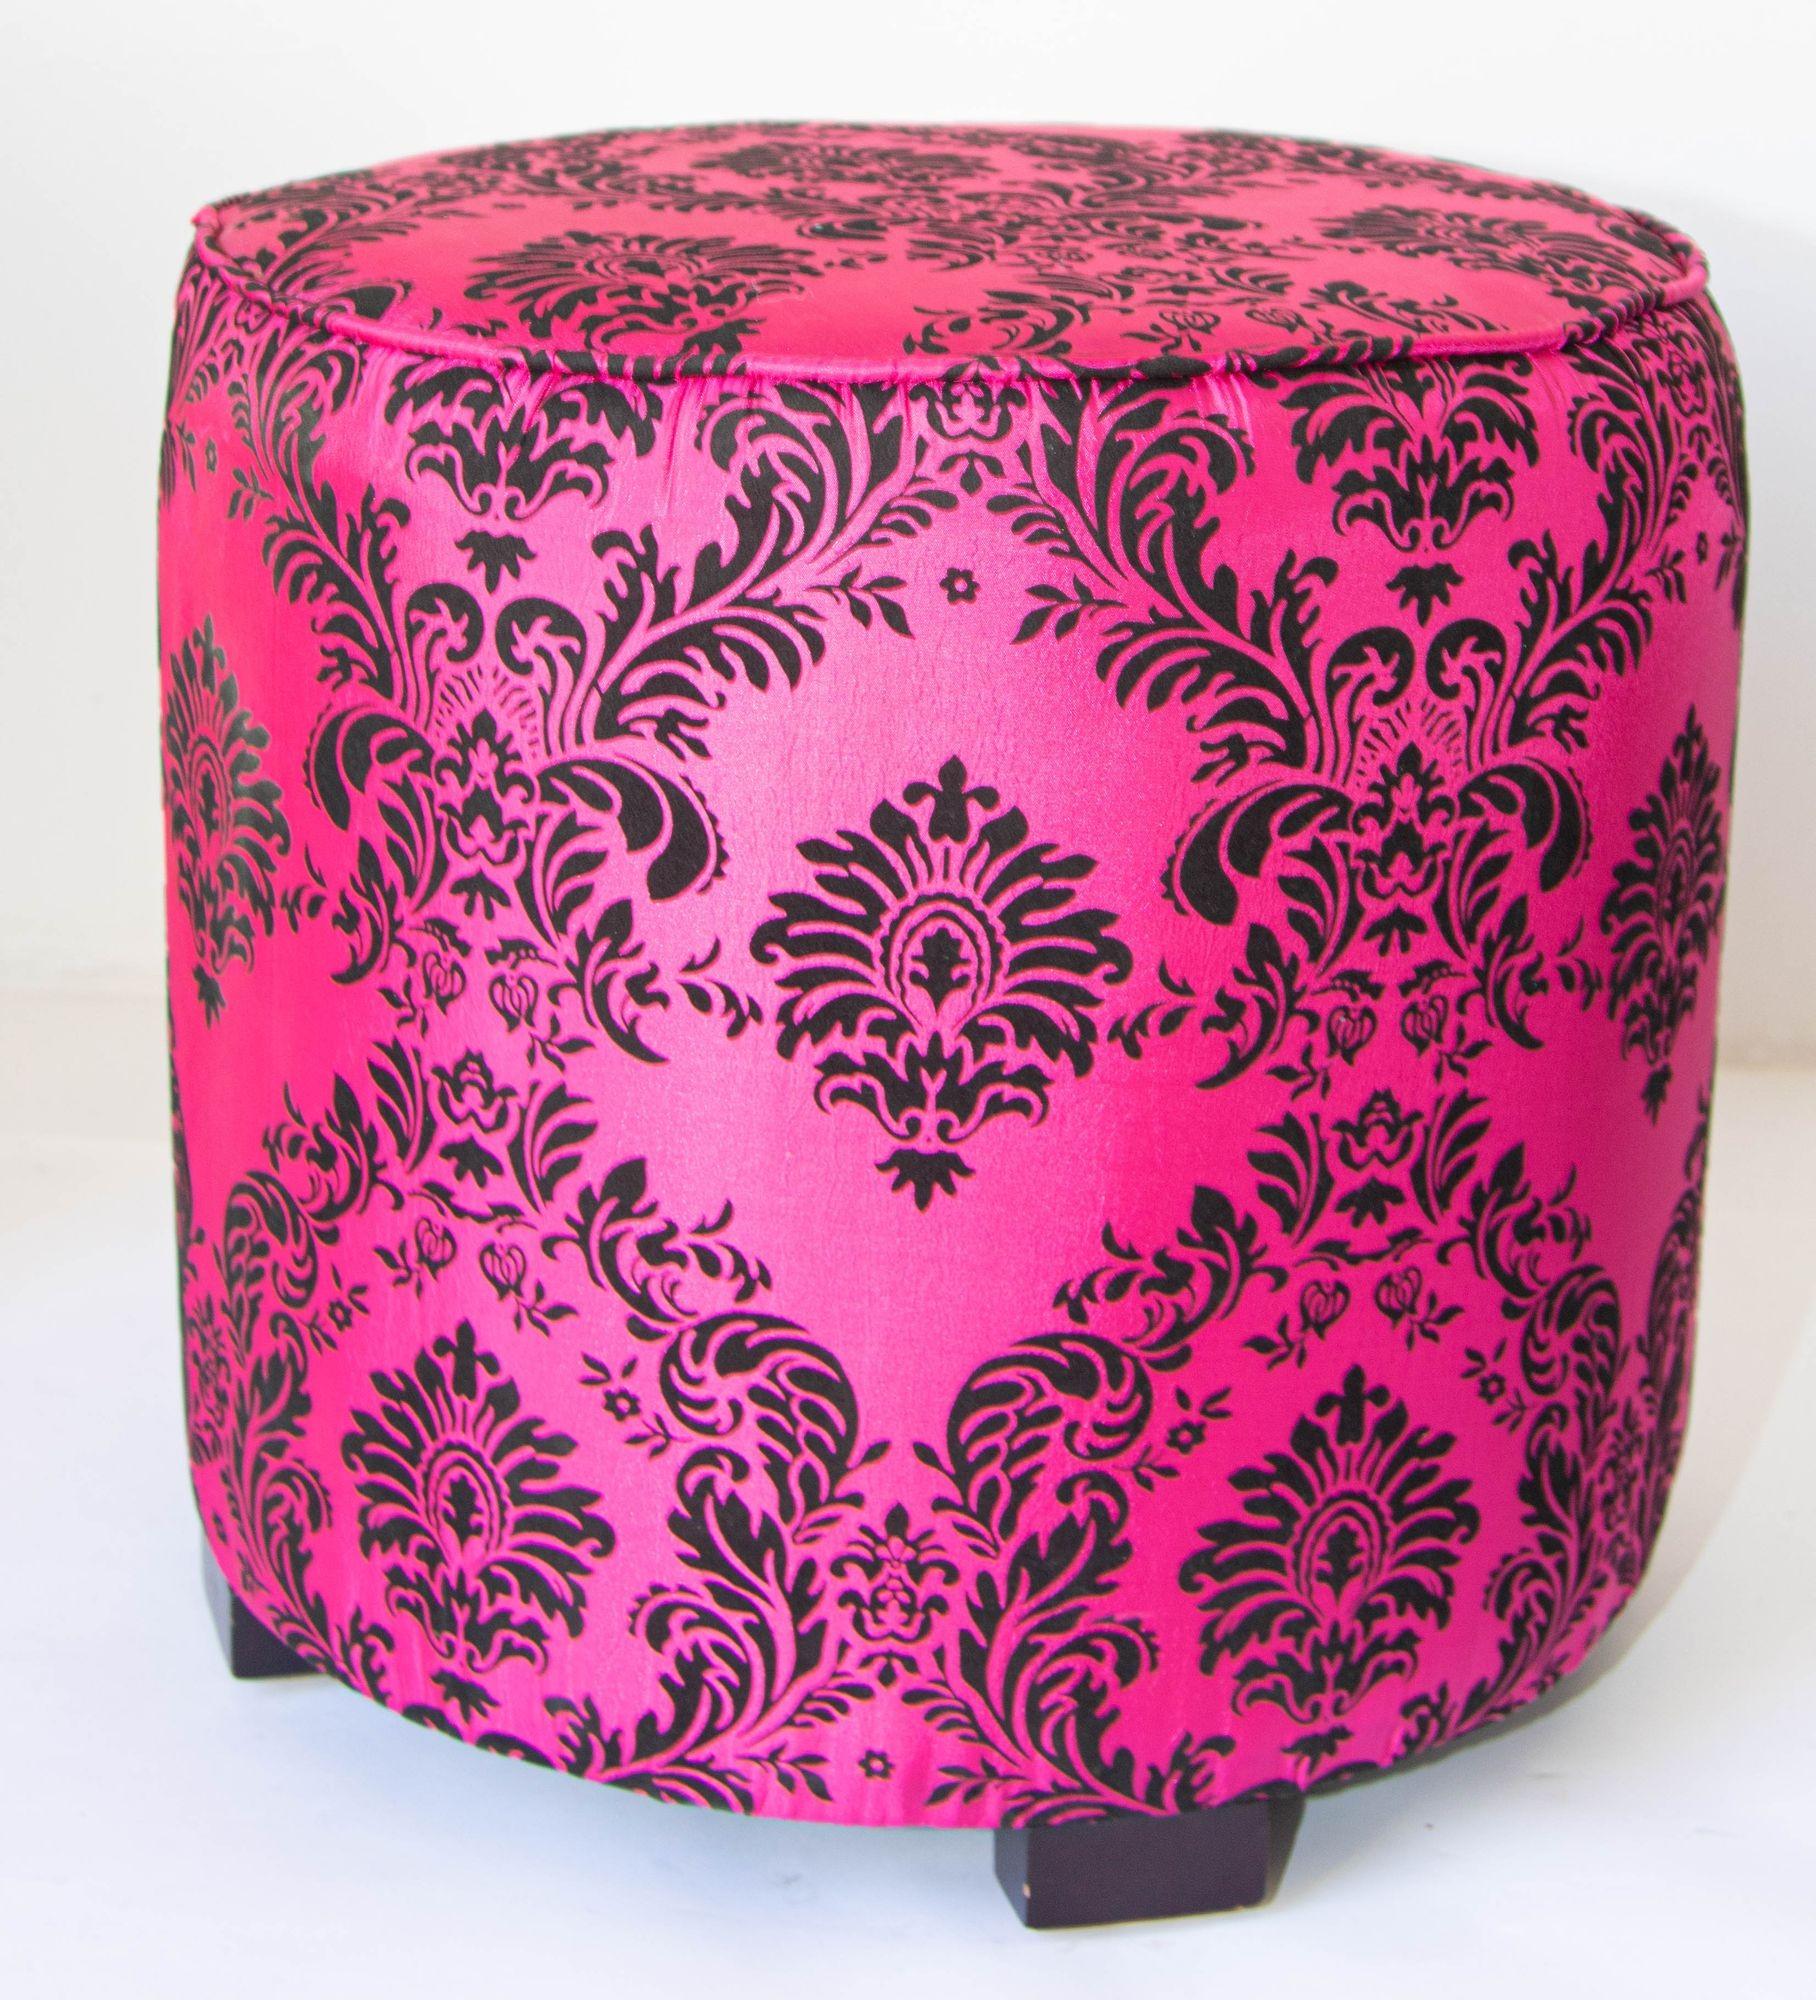 Pair of modern fuchsia and black Moroccan Art Deco Style stools.
 The upholstery is a damask fabric in floral taffeta with a raised velvet printed texture.
Pair of modern Contemporary round Moroccan style stool in pink fabric upholstery in 1970s